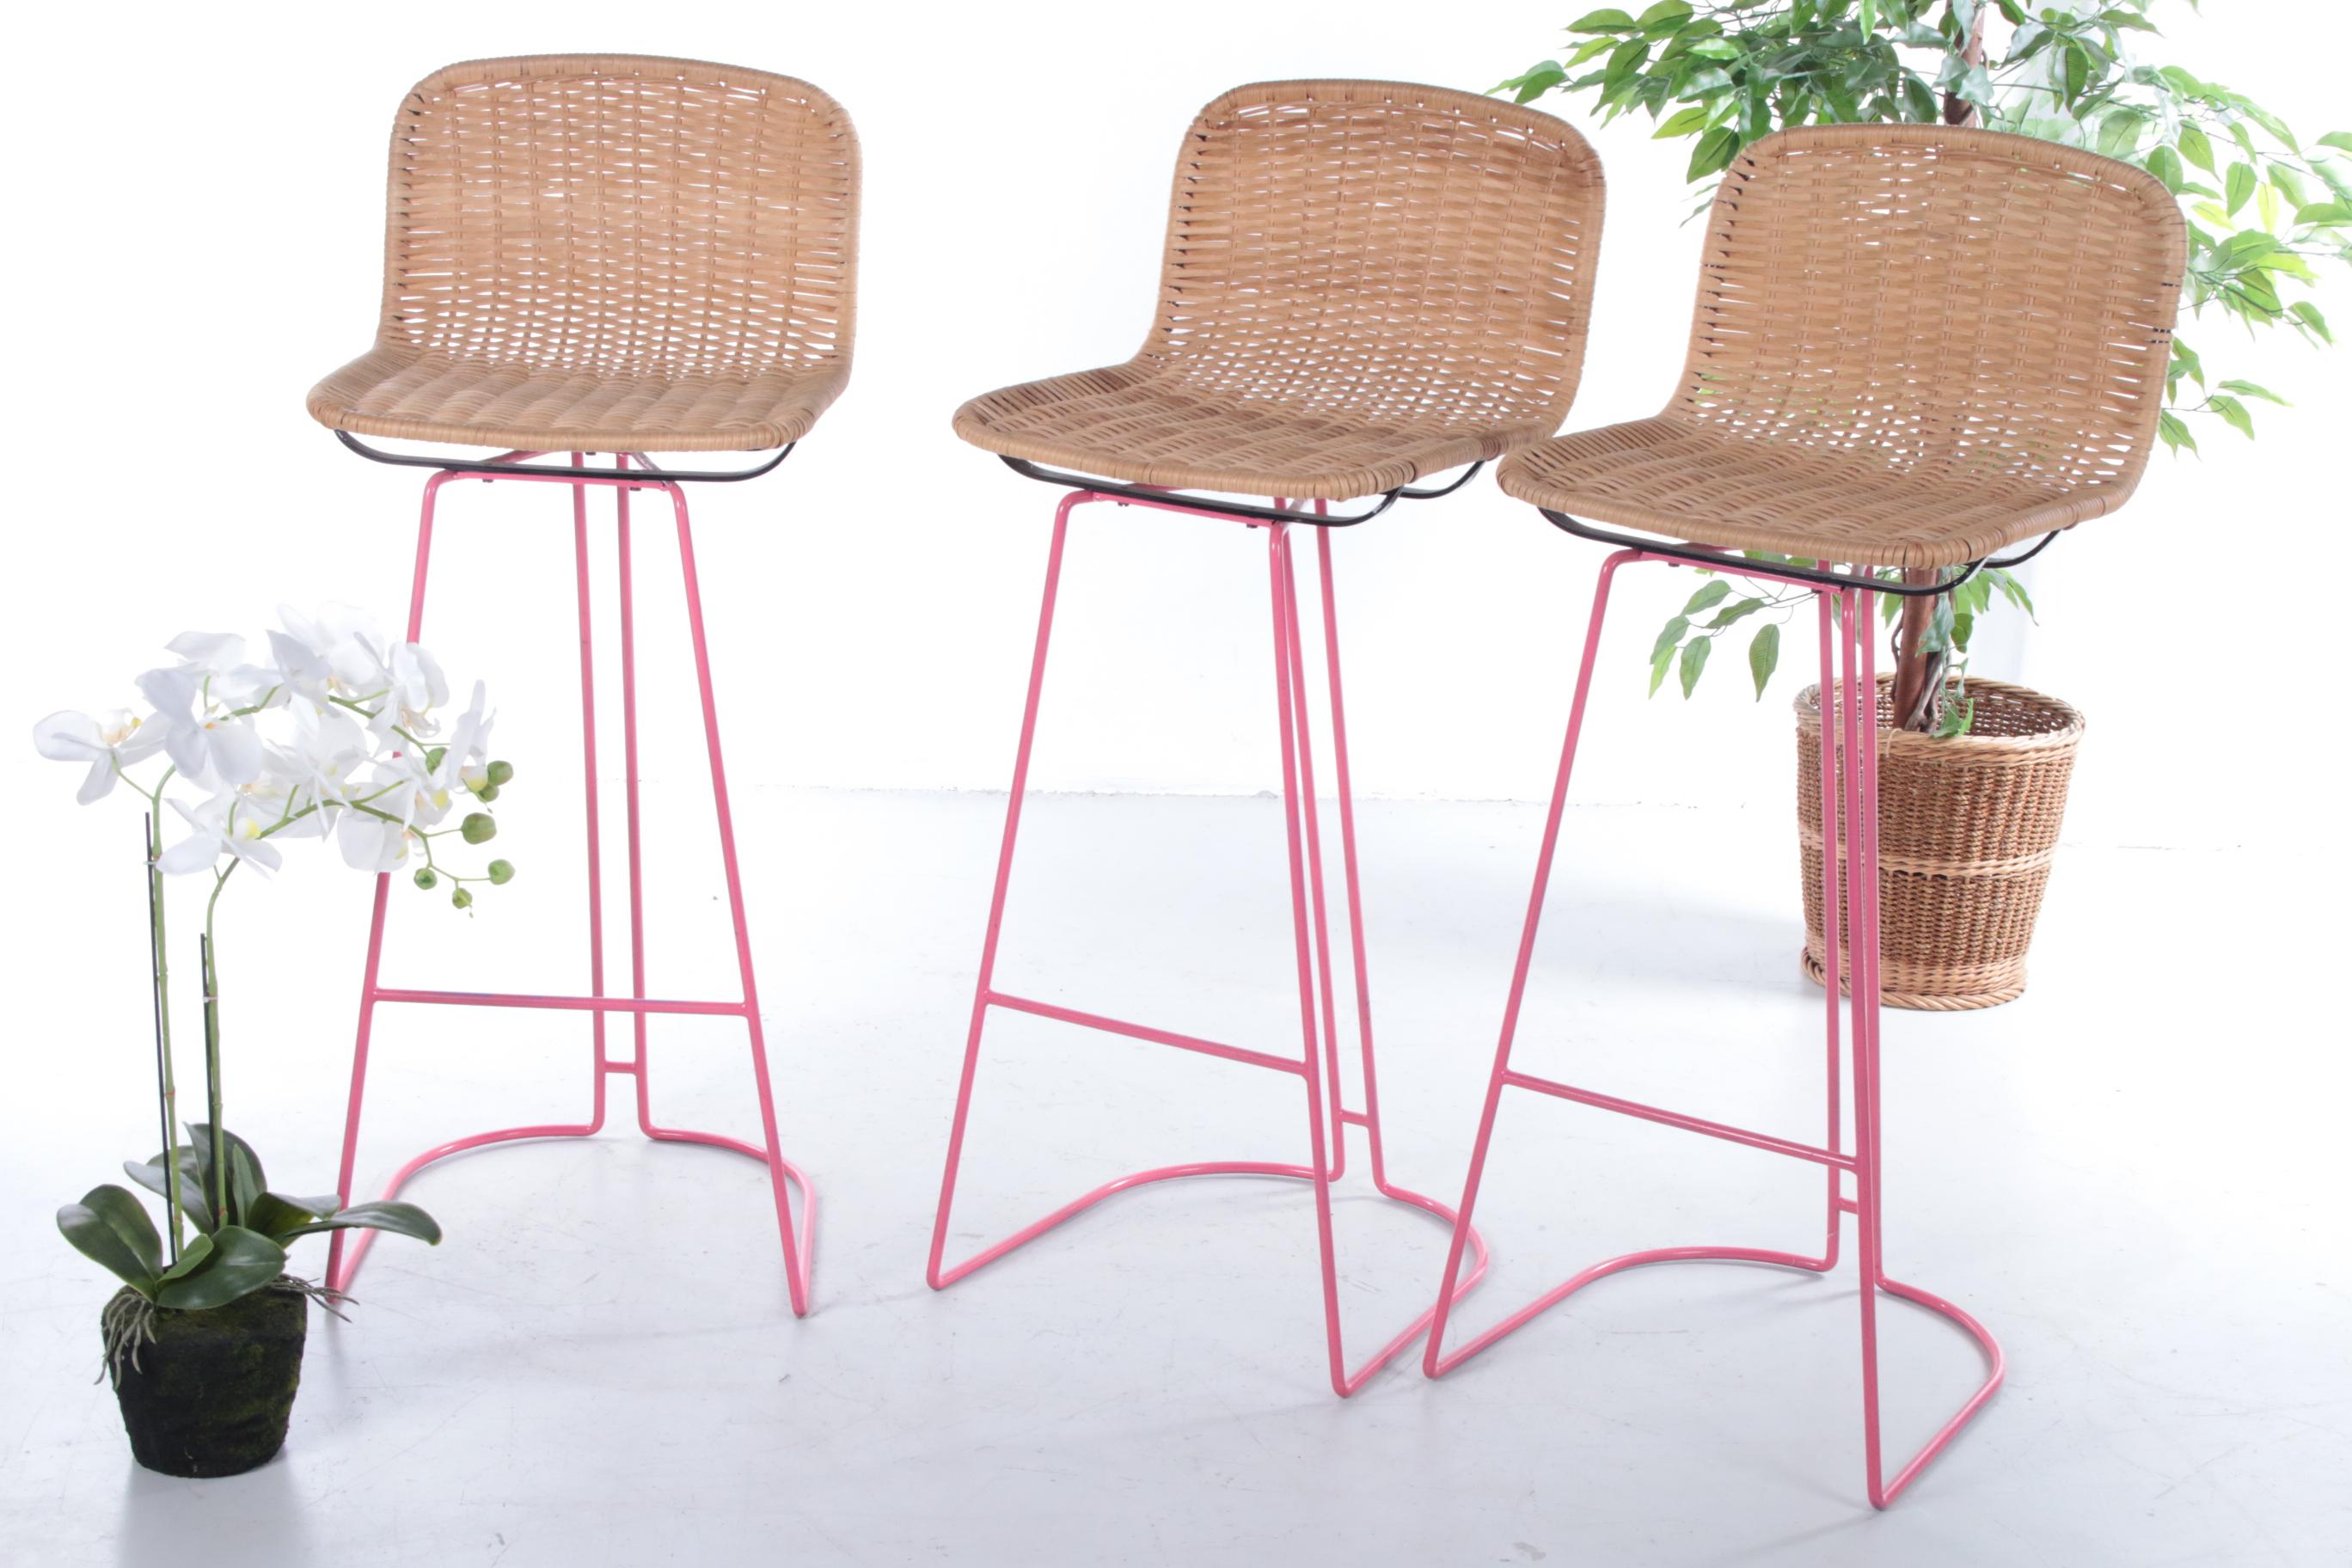 Set of three barstools with a pink lacquered metal base and wicker seat. The light pink color gives a special and unique touch to the stools.

Made in the 1980's by Cidue, Italy. All three stools are in very good vintage condition, stable and